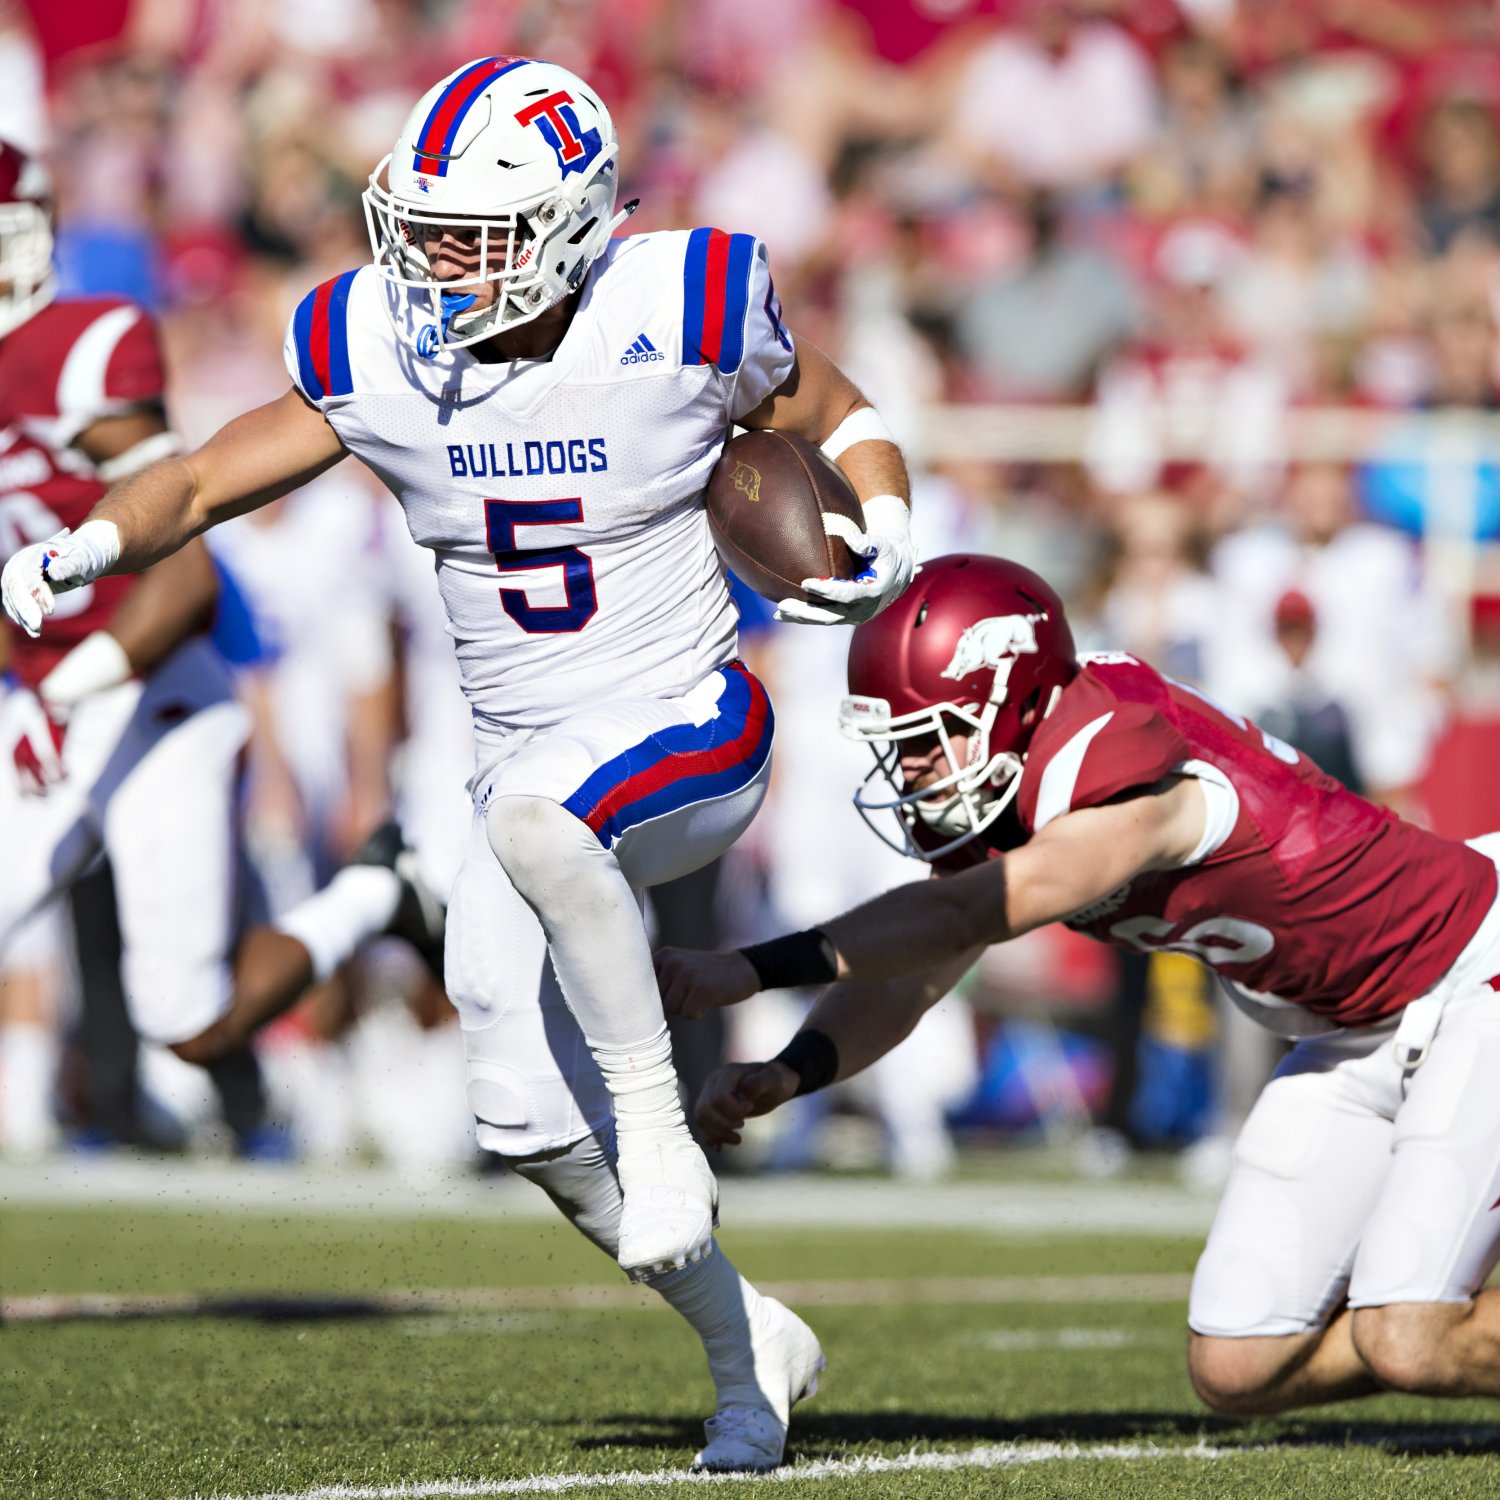 The Best CFB Player You've Never Heard Of Louisiana Tech's Trent